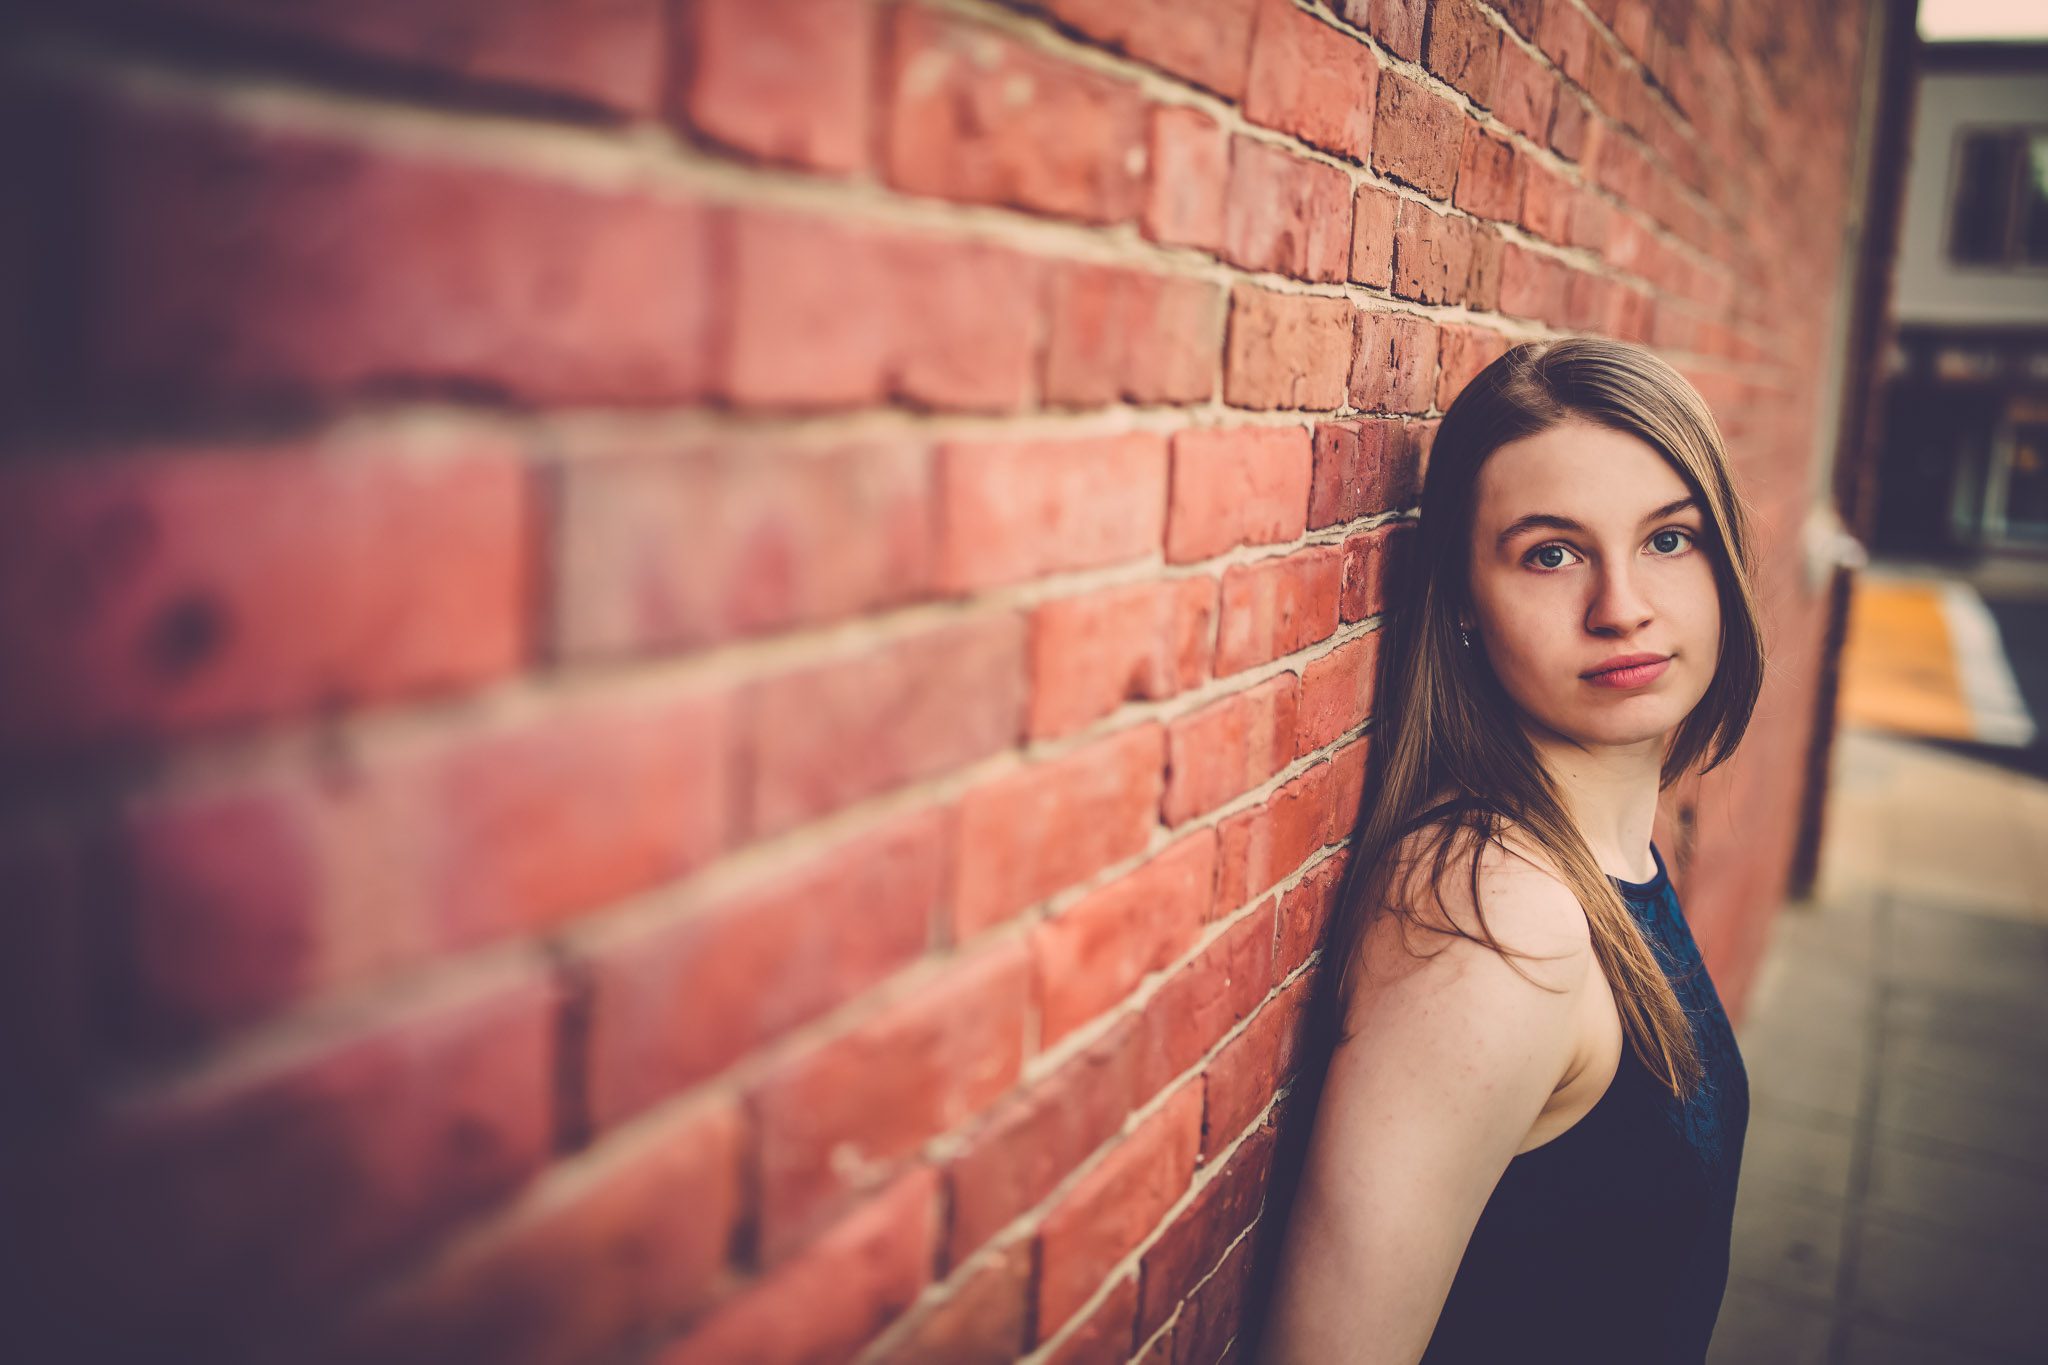 Senior portrait of a young woman in a blue dress leaning against a brick wall in a city in Ayer Massachusetts